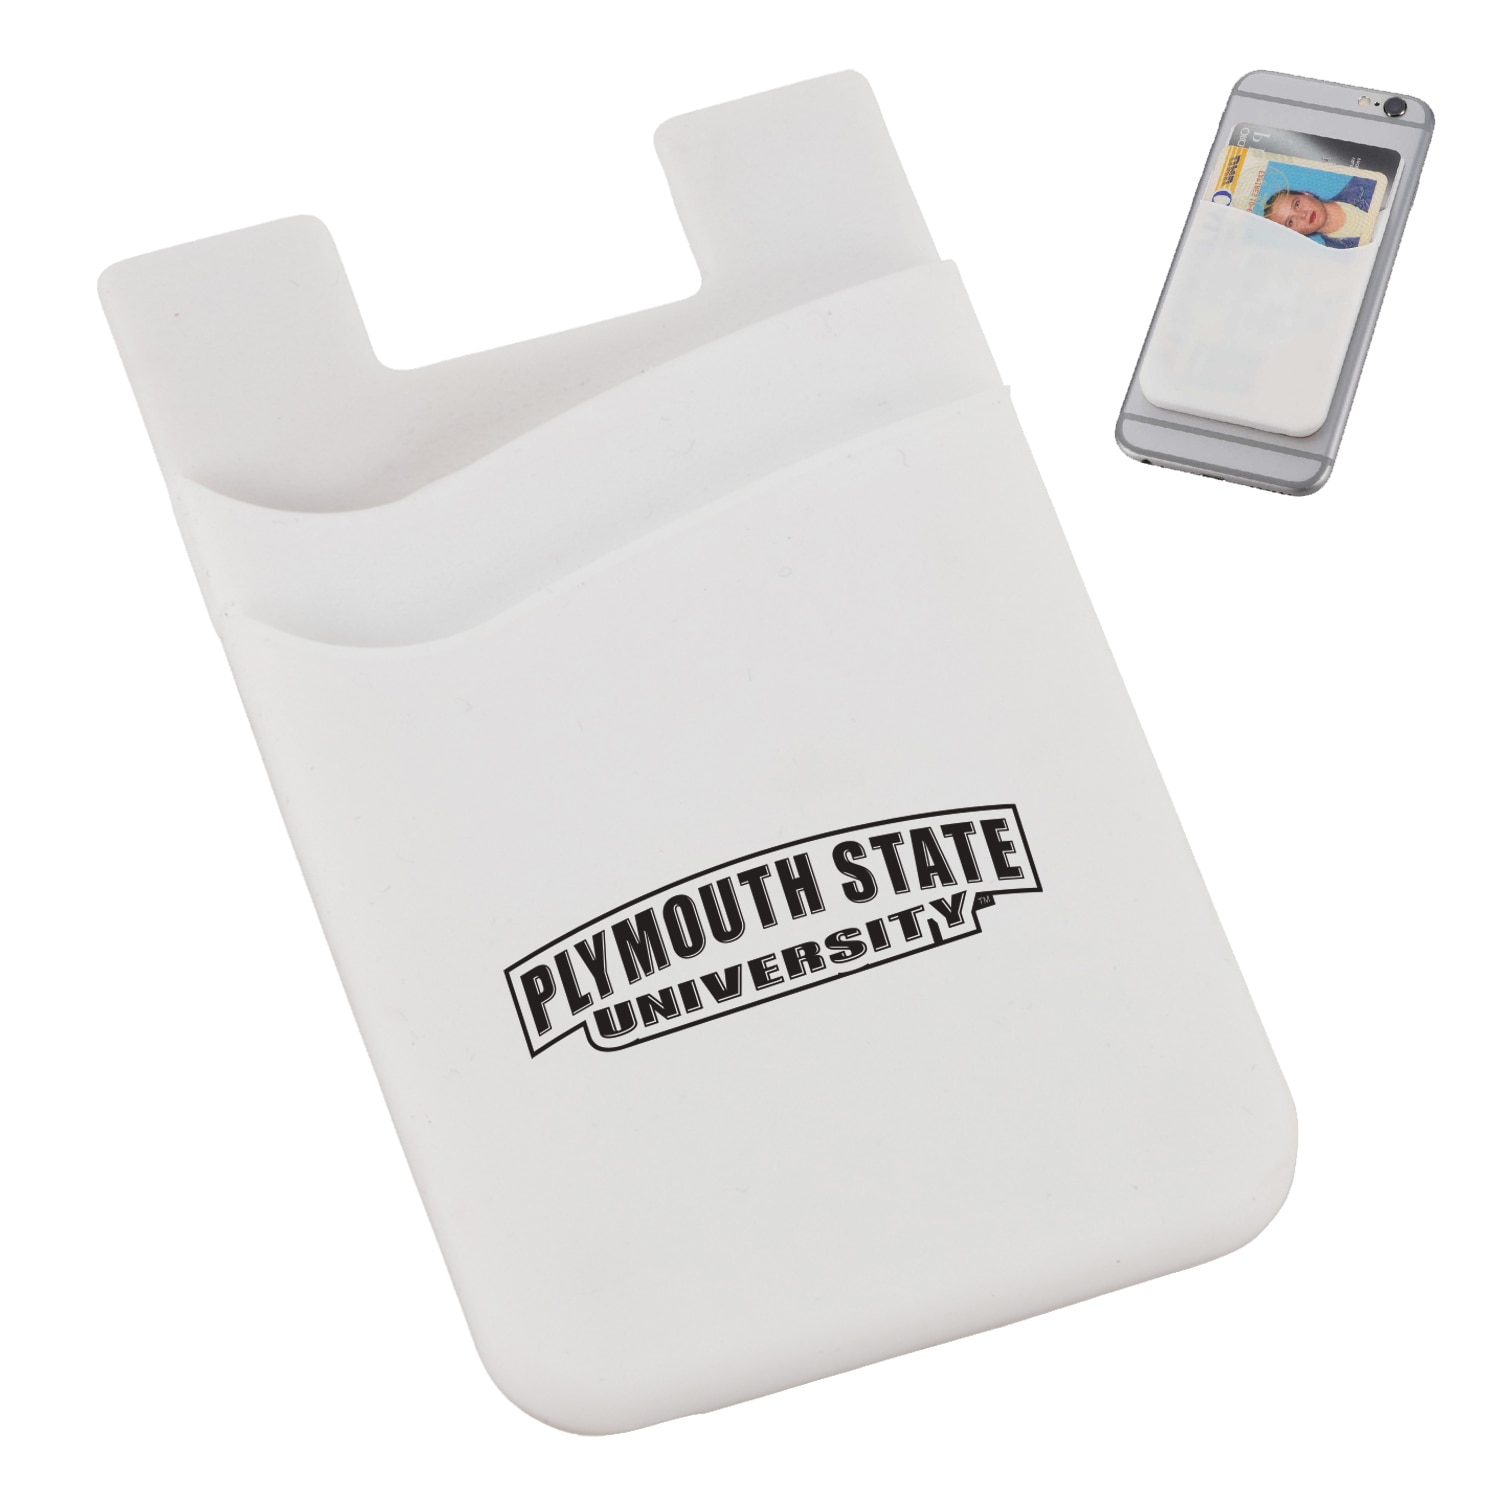 Plymouth State University Dual Pocket Phone Wallet